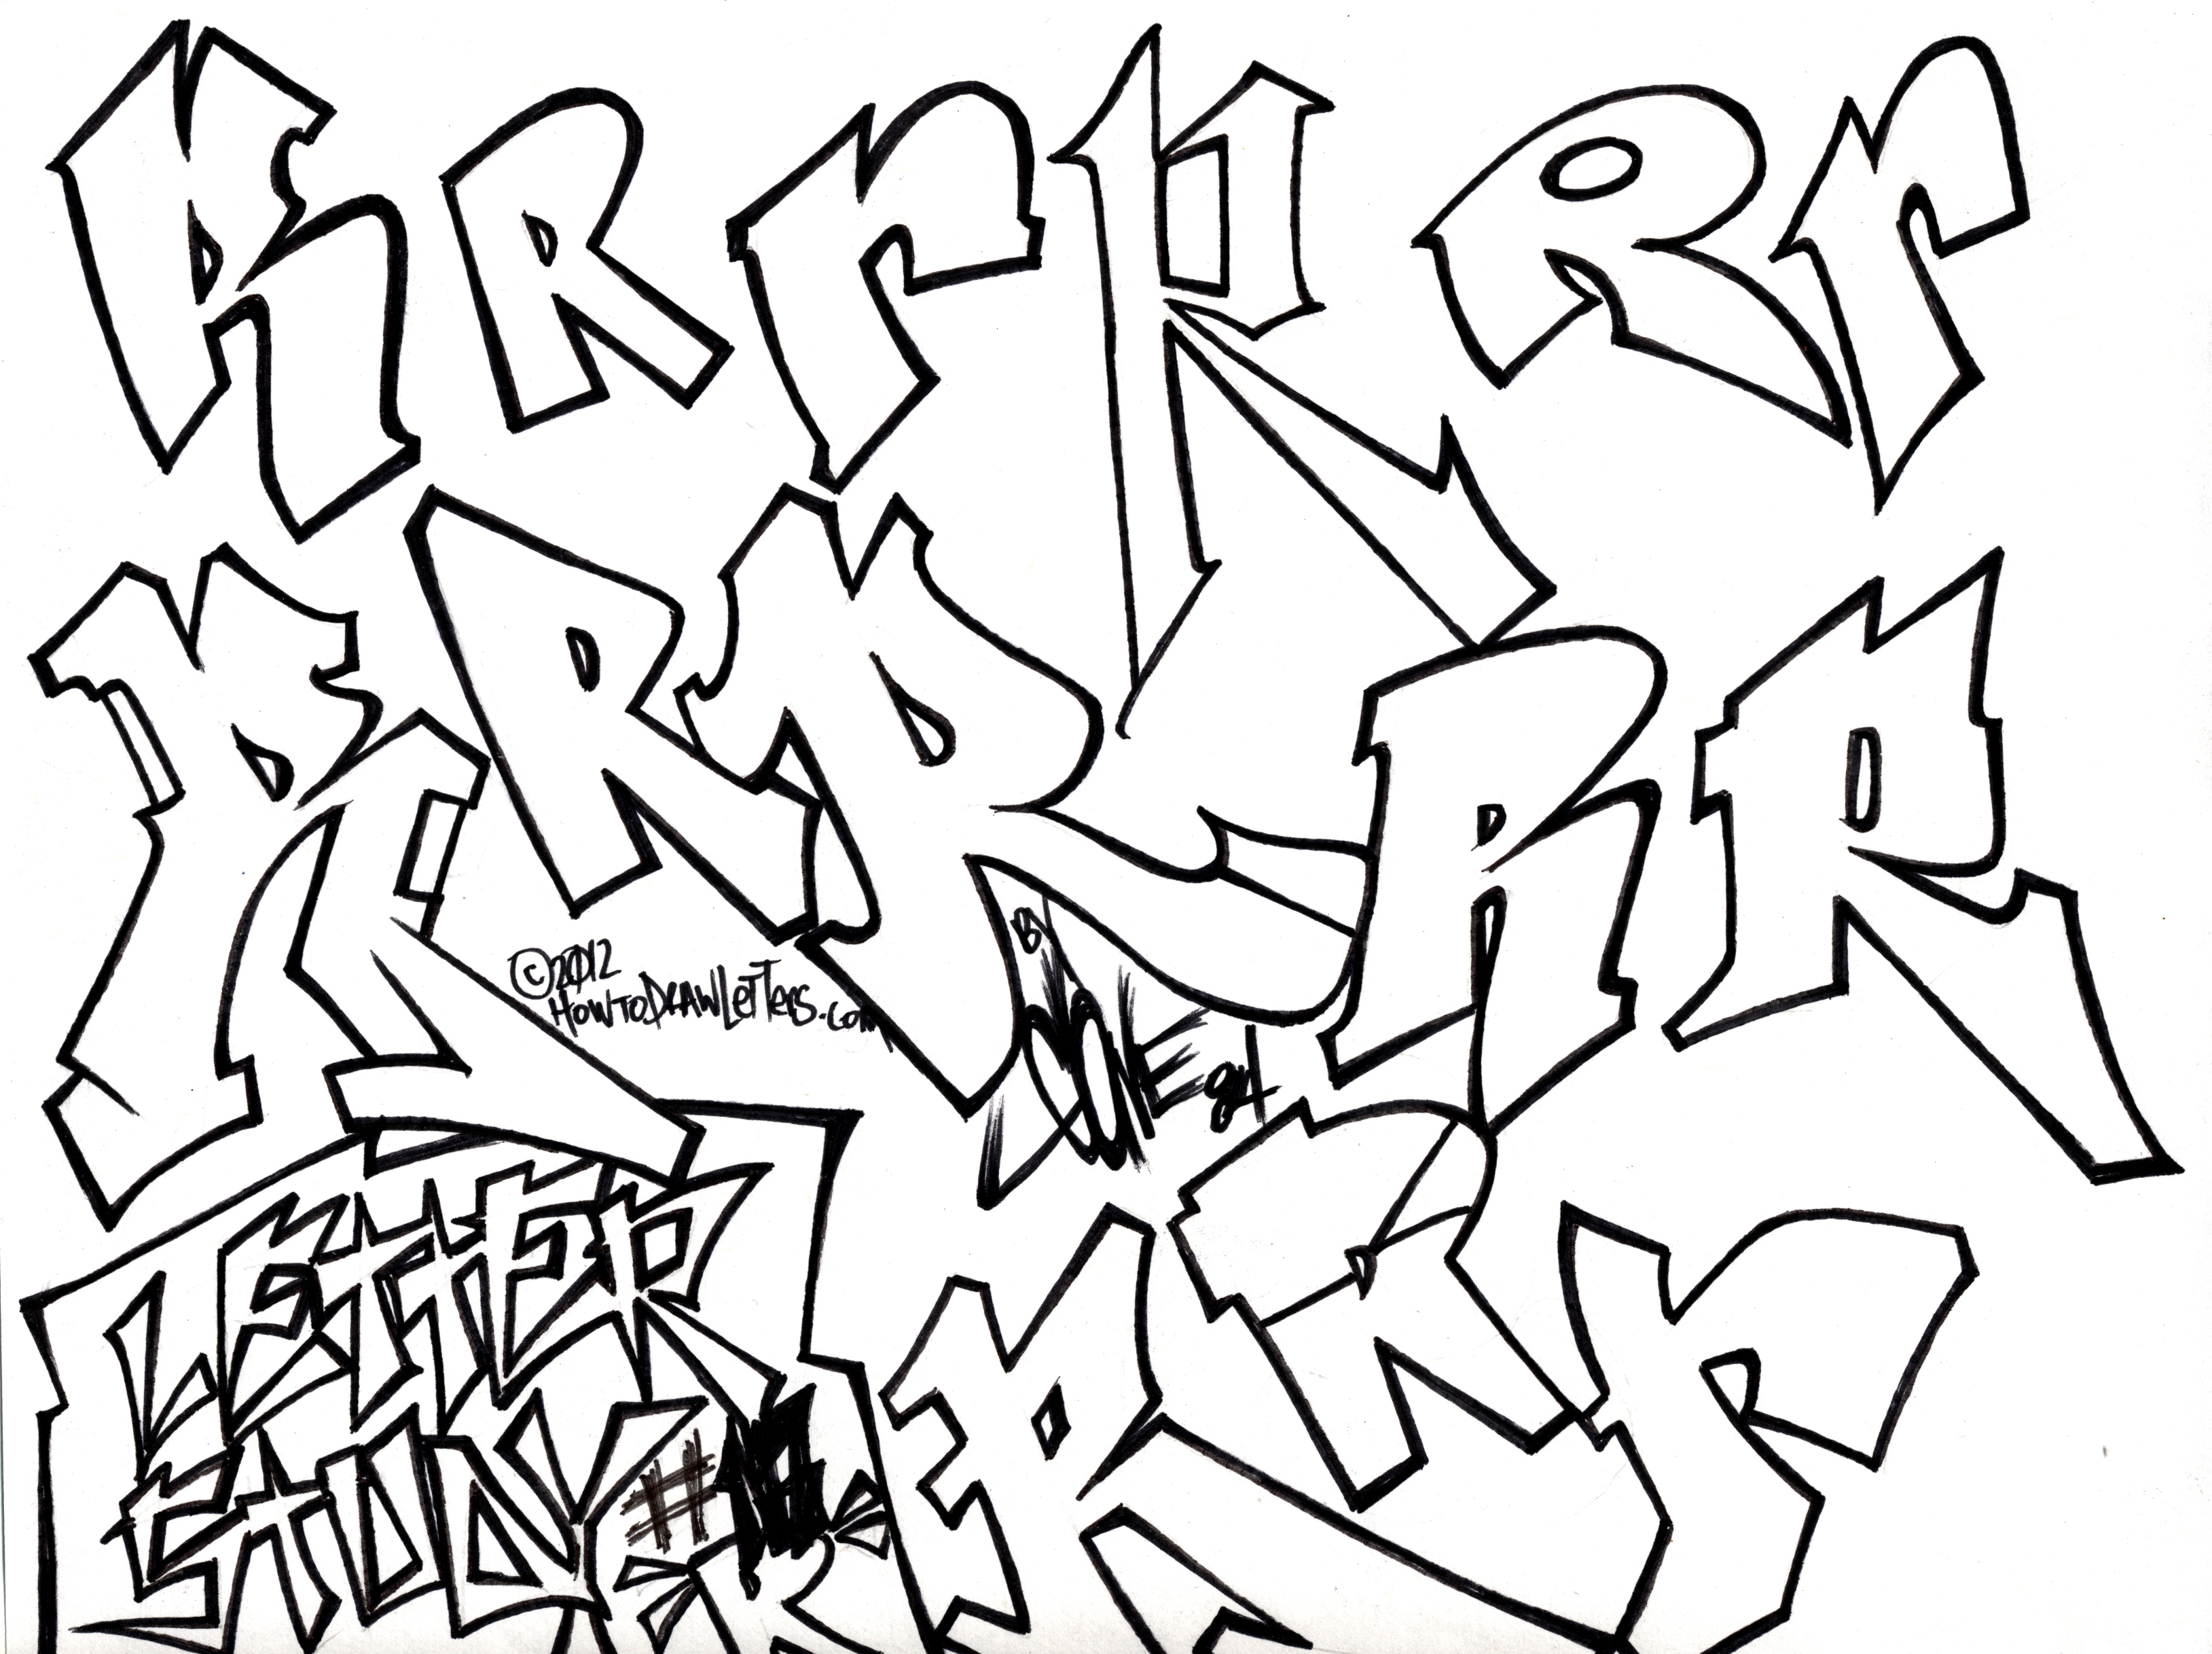 The best free Ghetto drawing images. Download from 91 free drawings of